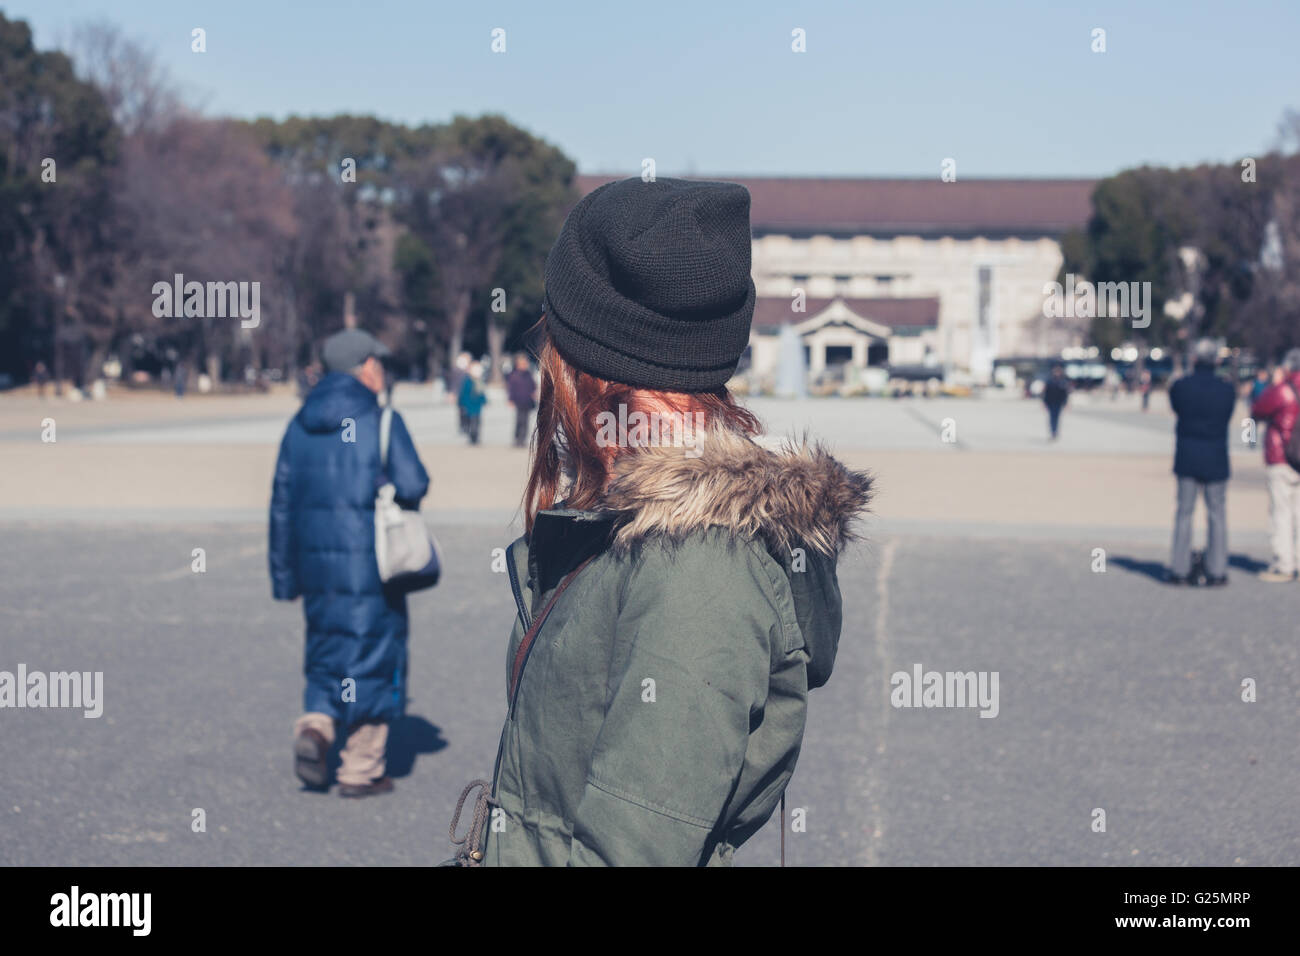 A young woman is walking in Ueno park in Tokyo Stock Photo